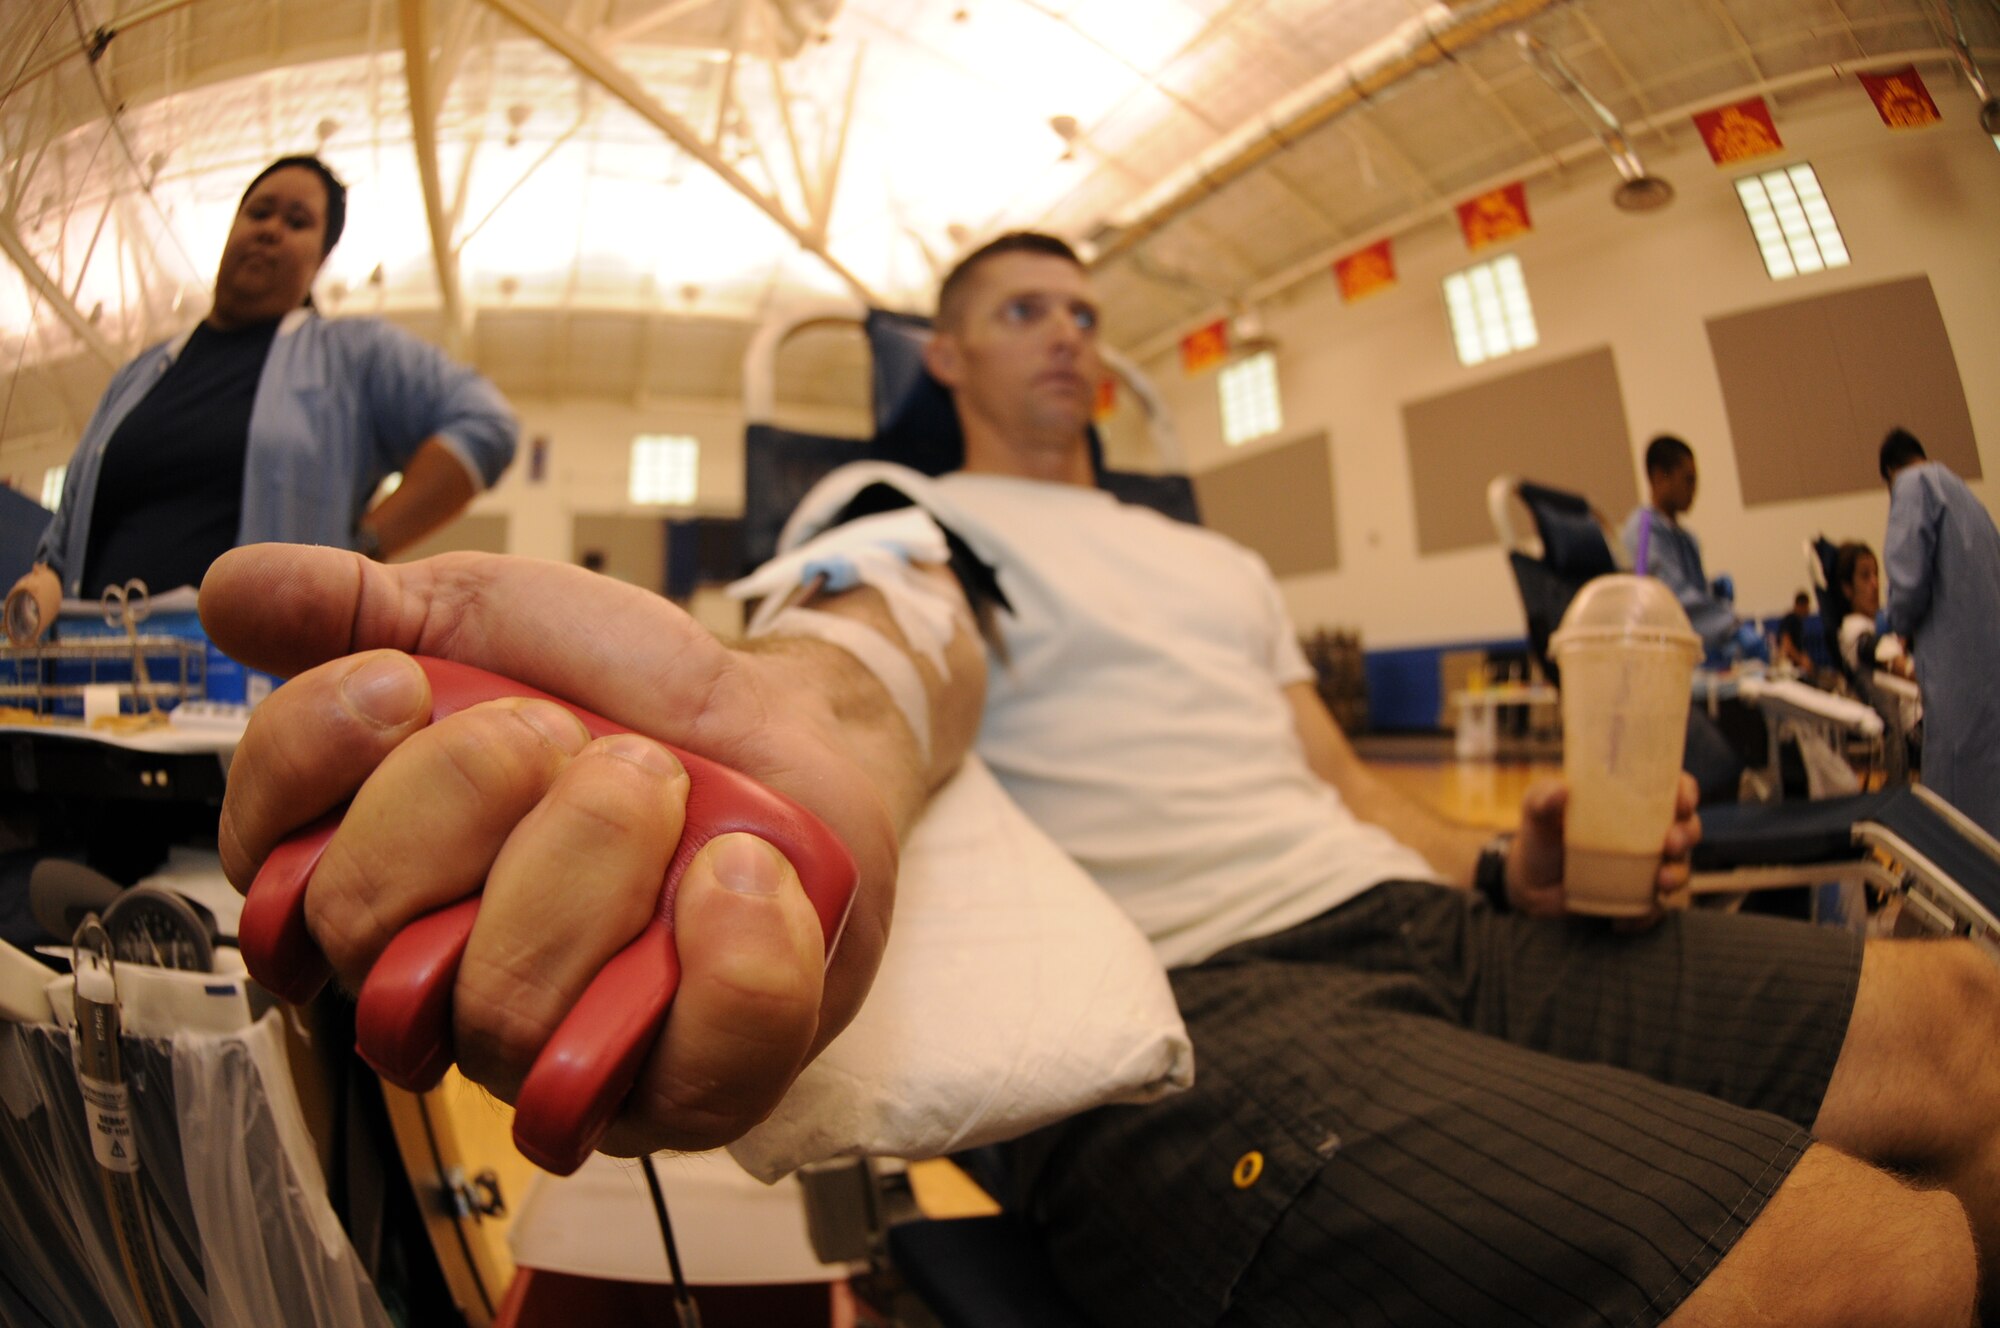 Master Sgt. Christopher Thorne, 734th Air Mobility Squadron air transportation manager, squeezes his hand to increase the blood flow through his veins at an Armed Services Blood Program blood drive Aug. 7, 2013, on Andersen Air Force Base, Guam. Guam’s ASBP Donor Center conducts a blood drive at the Coral Reef Fitness Center monthly. (U.S. Air Force photo by Airman 1st Class Emily A. Bradley/Released)